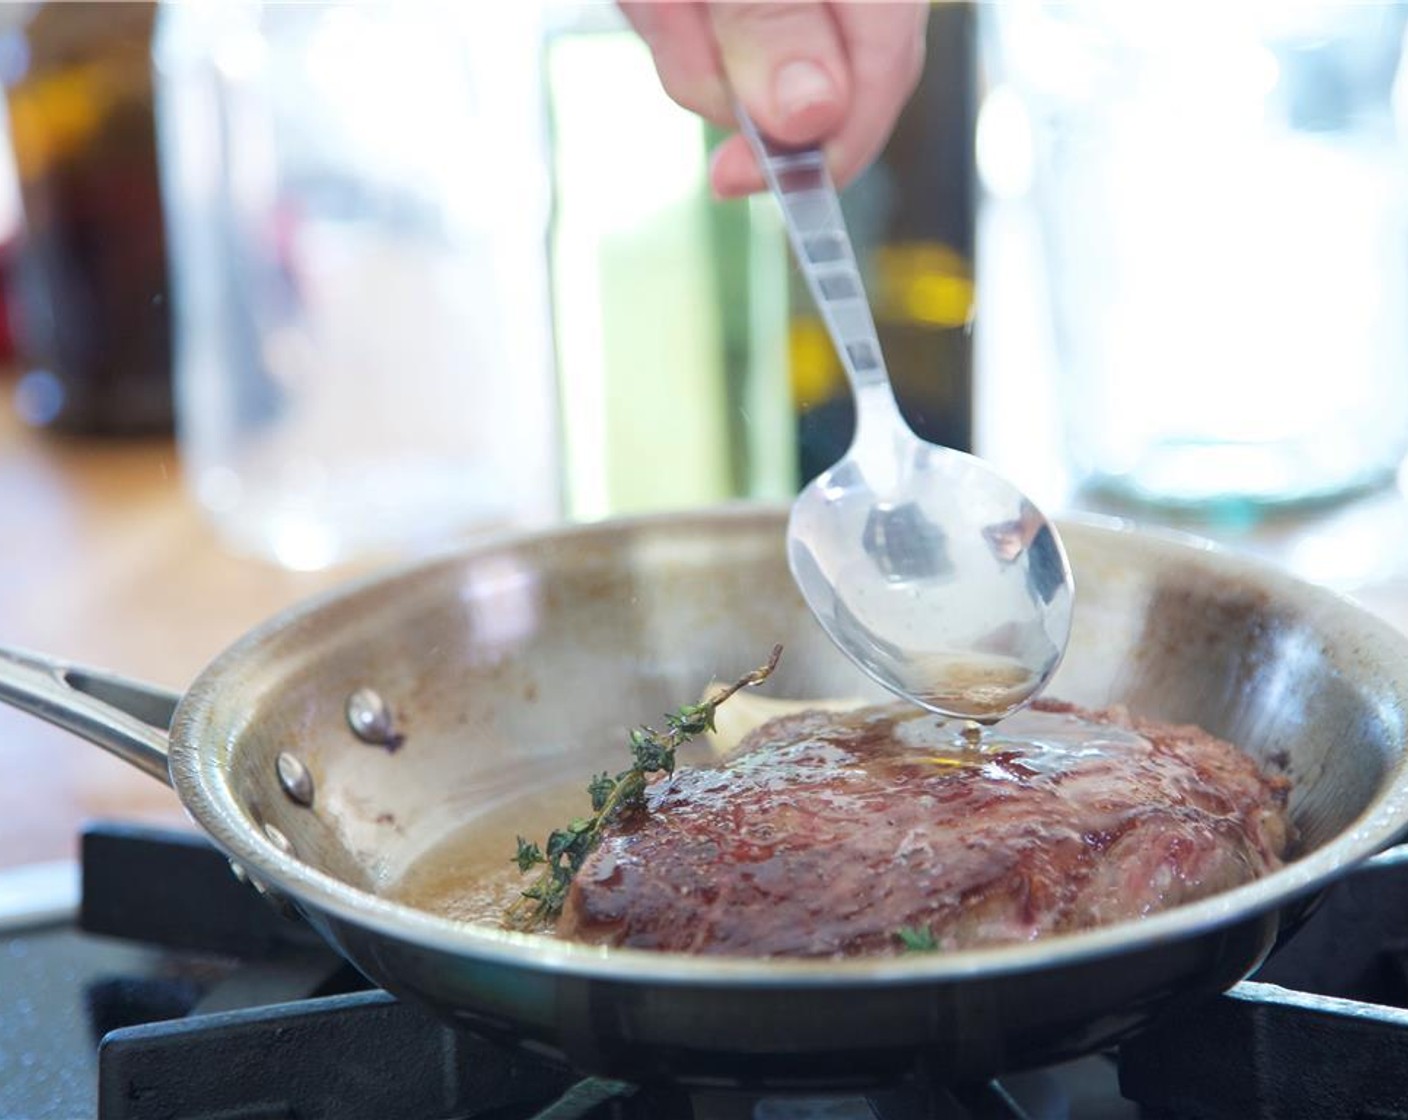 step 8 Pat dry the Rib Eye Steak (1) with paper towels. Place the medium cast iron skillet or heavy saute pan over high heat. Coat the steak with 1 teaspoon of olive oil. Season both sides of the steaks with 1/4 teaspoon salt and 1/4 teaspoon pepper.